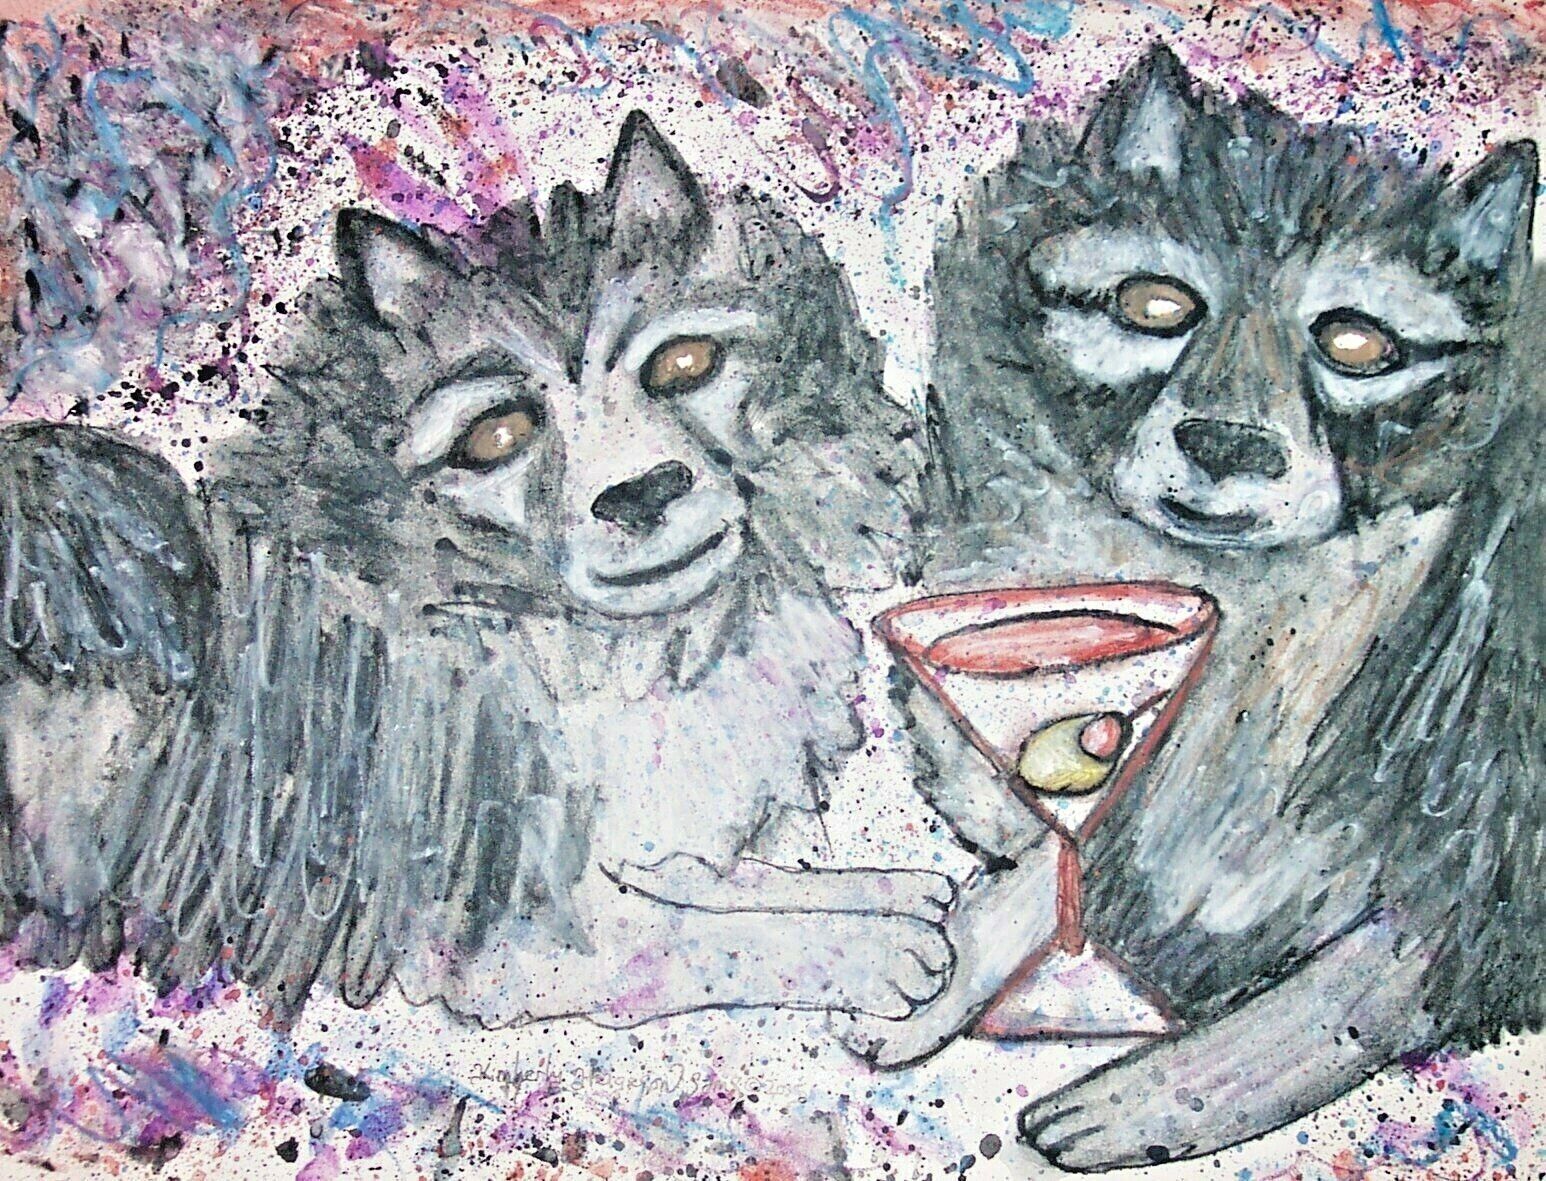 Keeshond Collectible 11x14 Art Print Drinking Martinis by Artist KSams